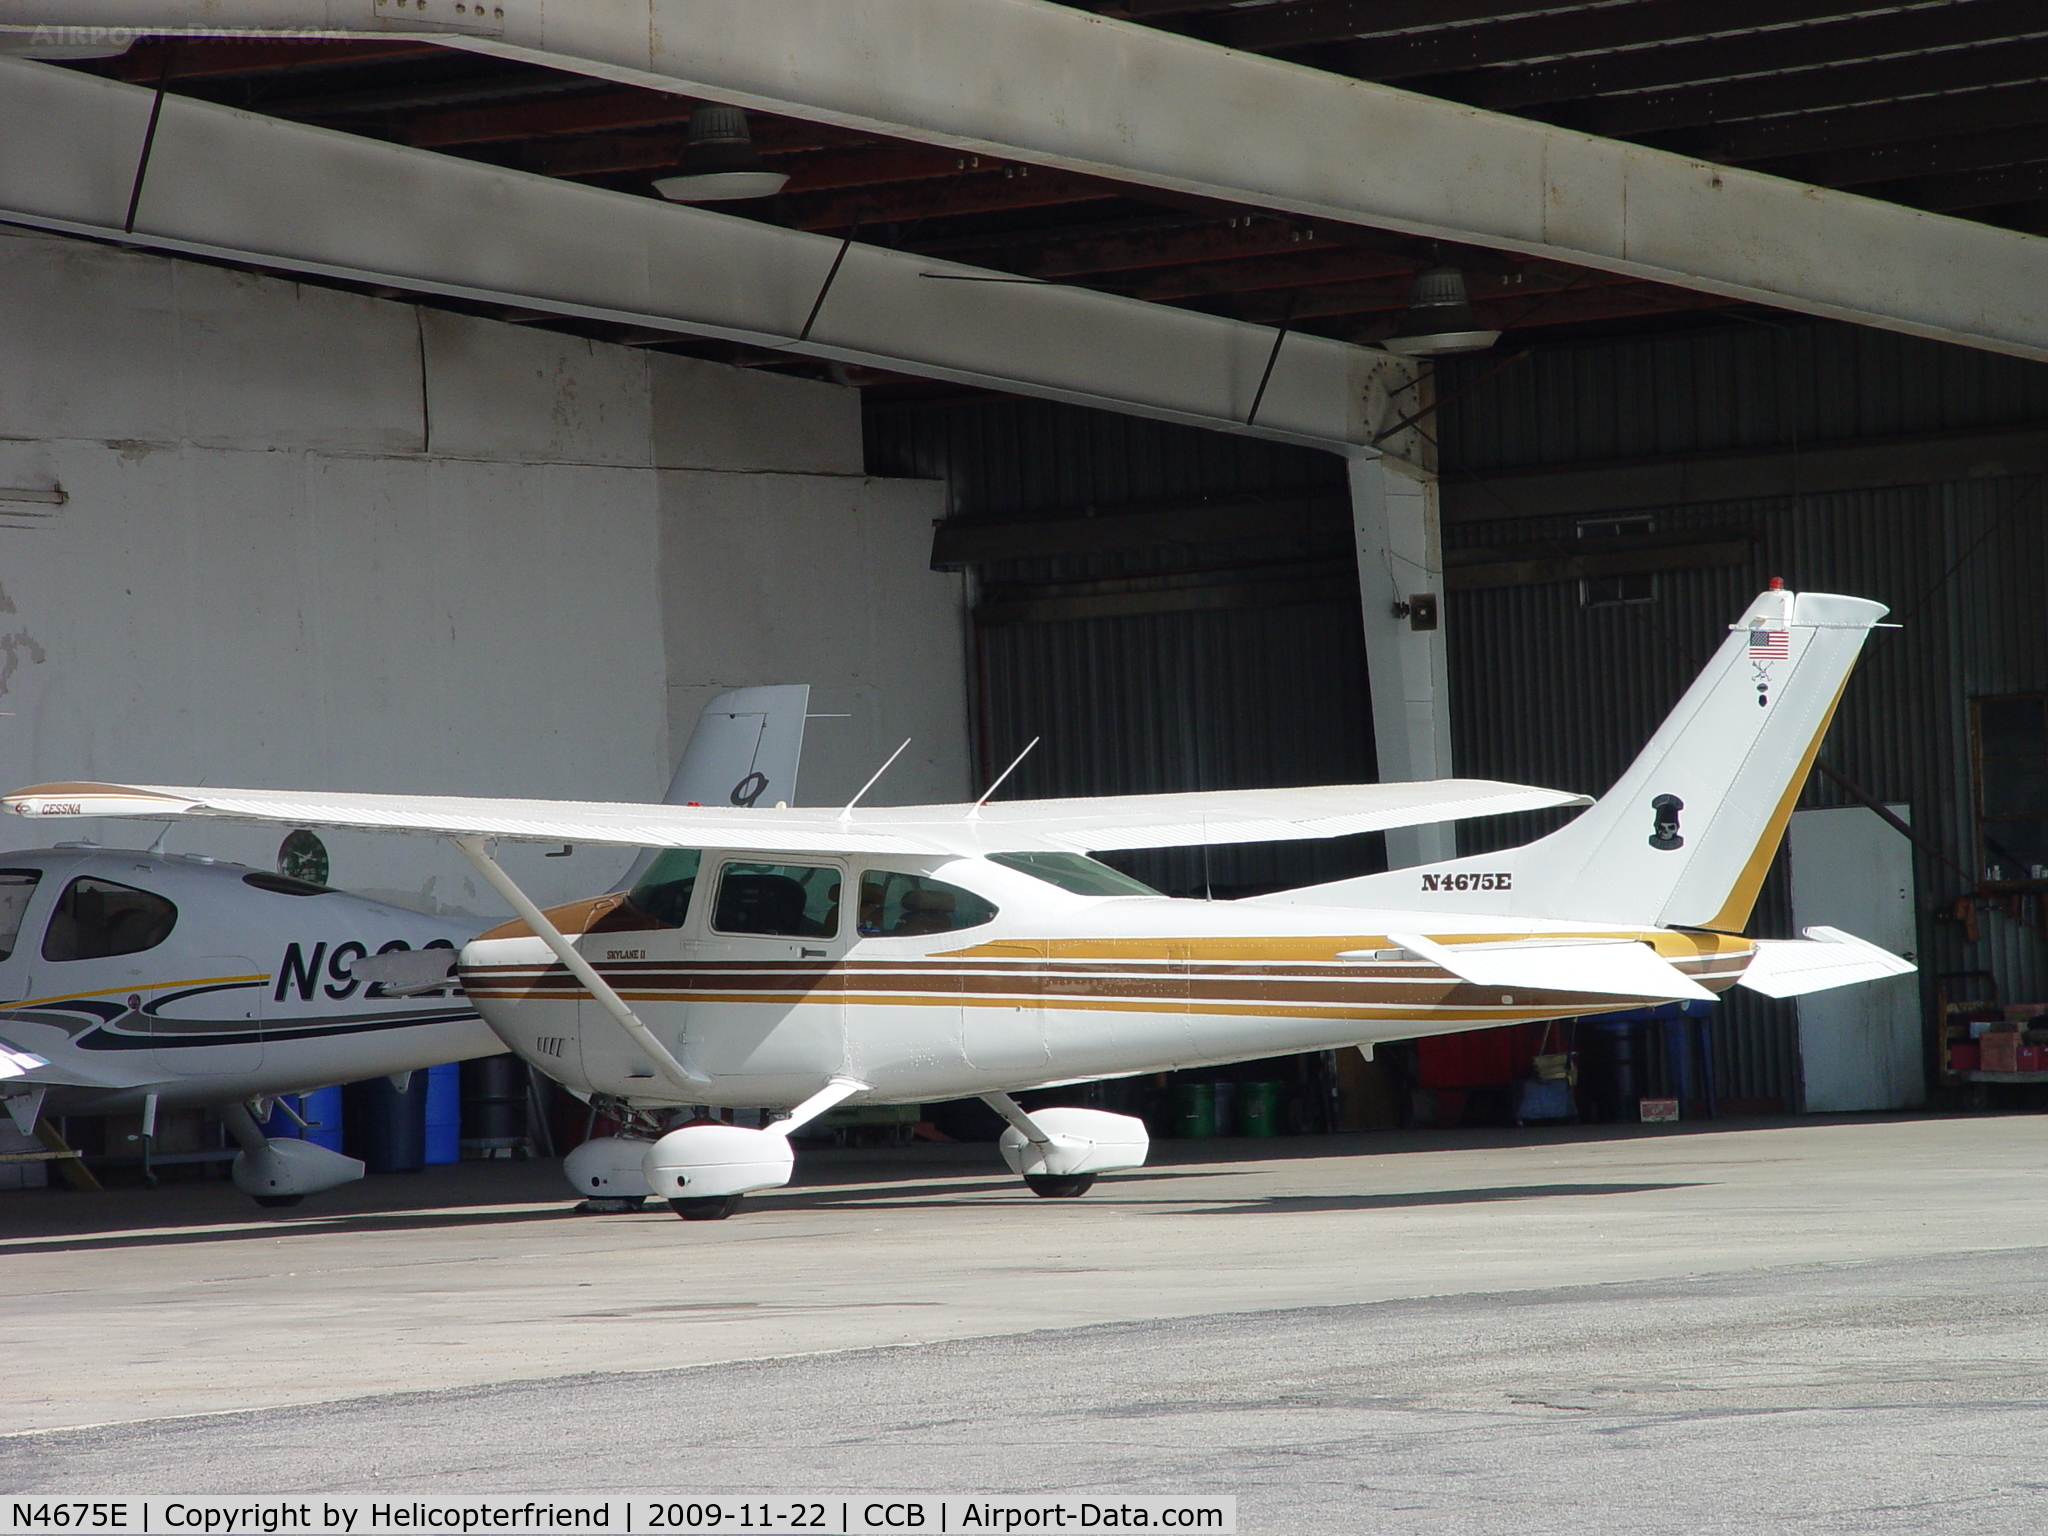 N4675E, 1982 Cessna 182R Skylane C/N 18268259, Parked in Foothill Aircraft Sales and Service bay